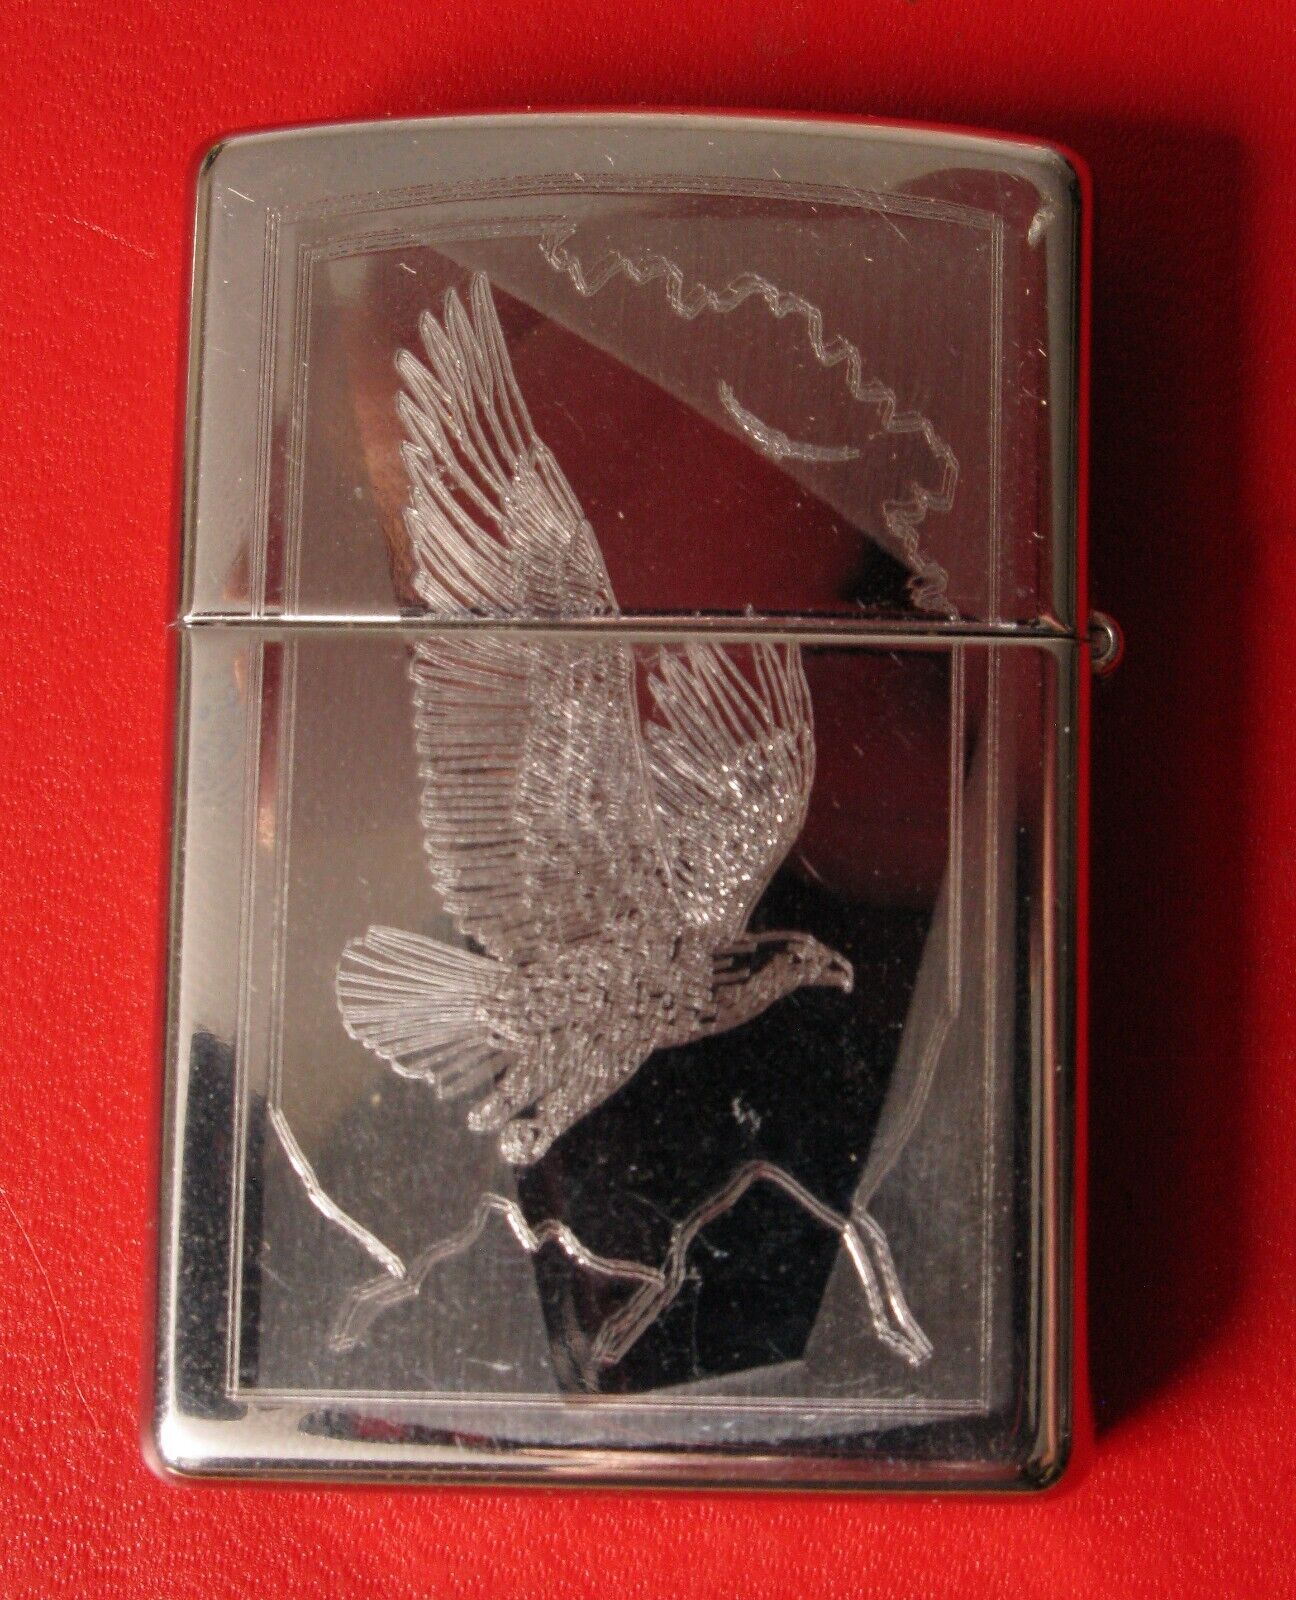 VINTAGE ZIPPO CIGARETTE LIGHTER ENGRAVED EAGLE BEER IS YUMMY CROSS CRUCIFIX 